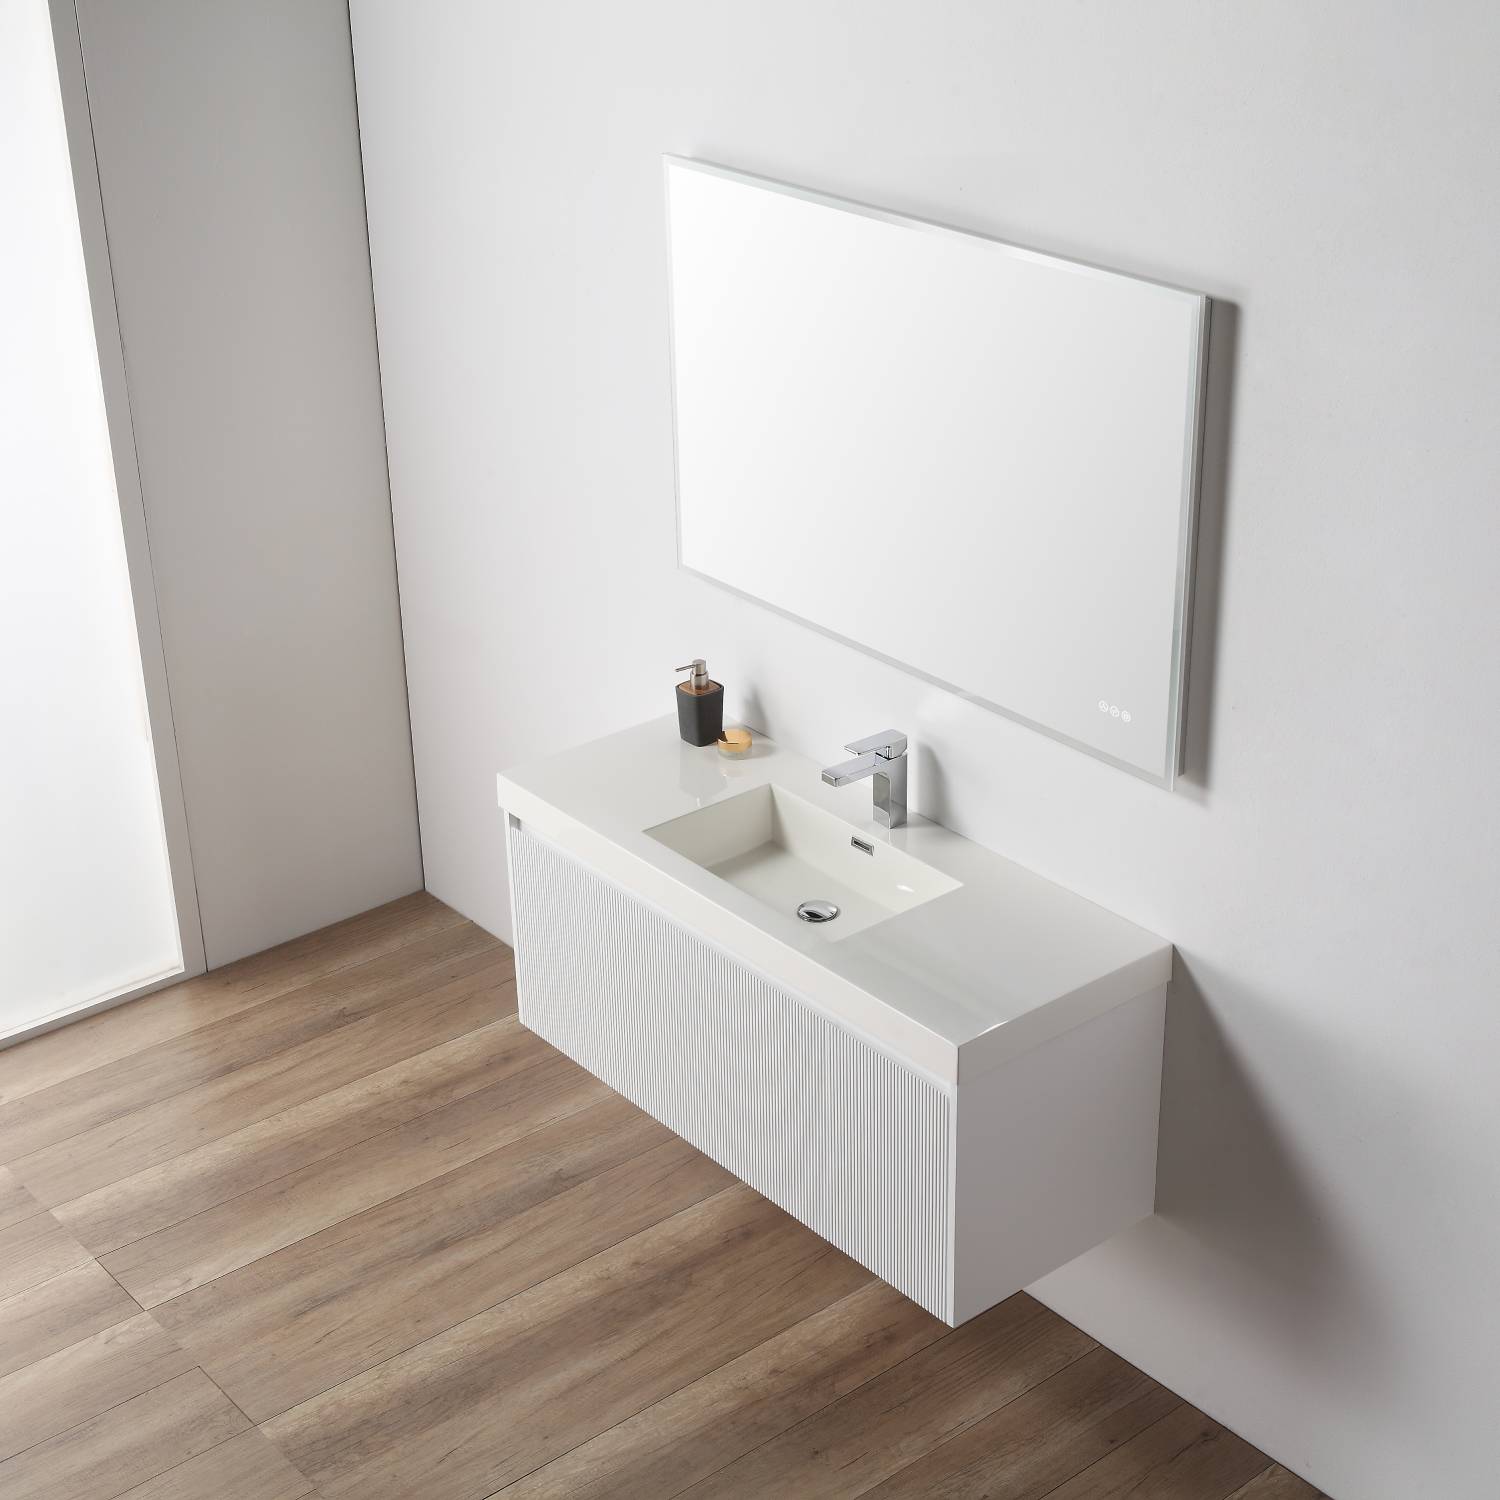 Discover our stunning collection of single basin vanities, including 30 inch options, and floating designs.